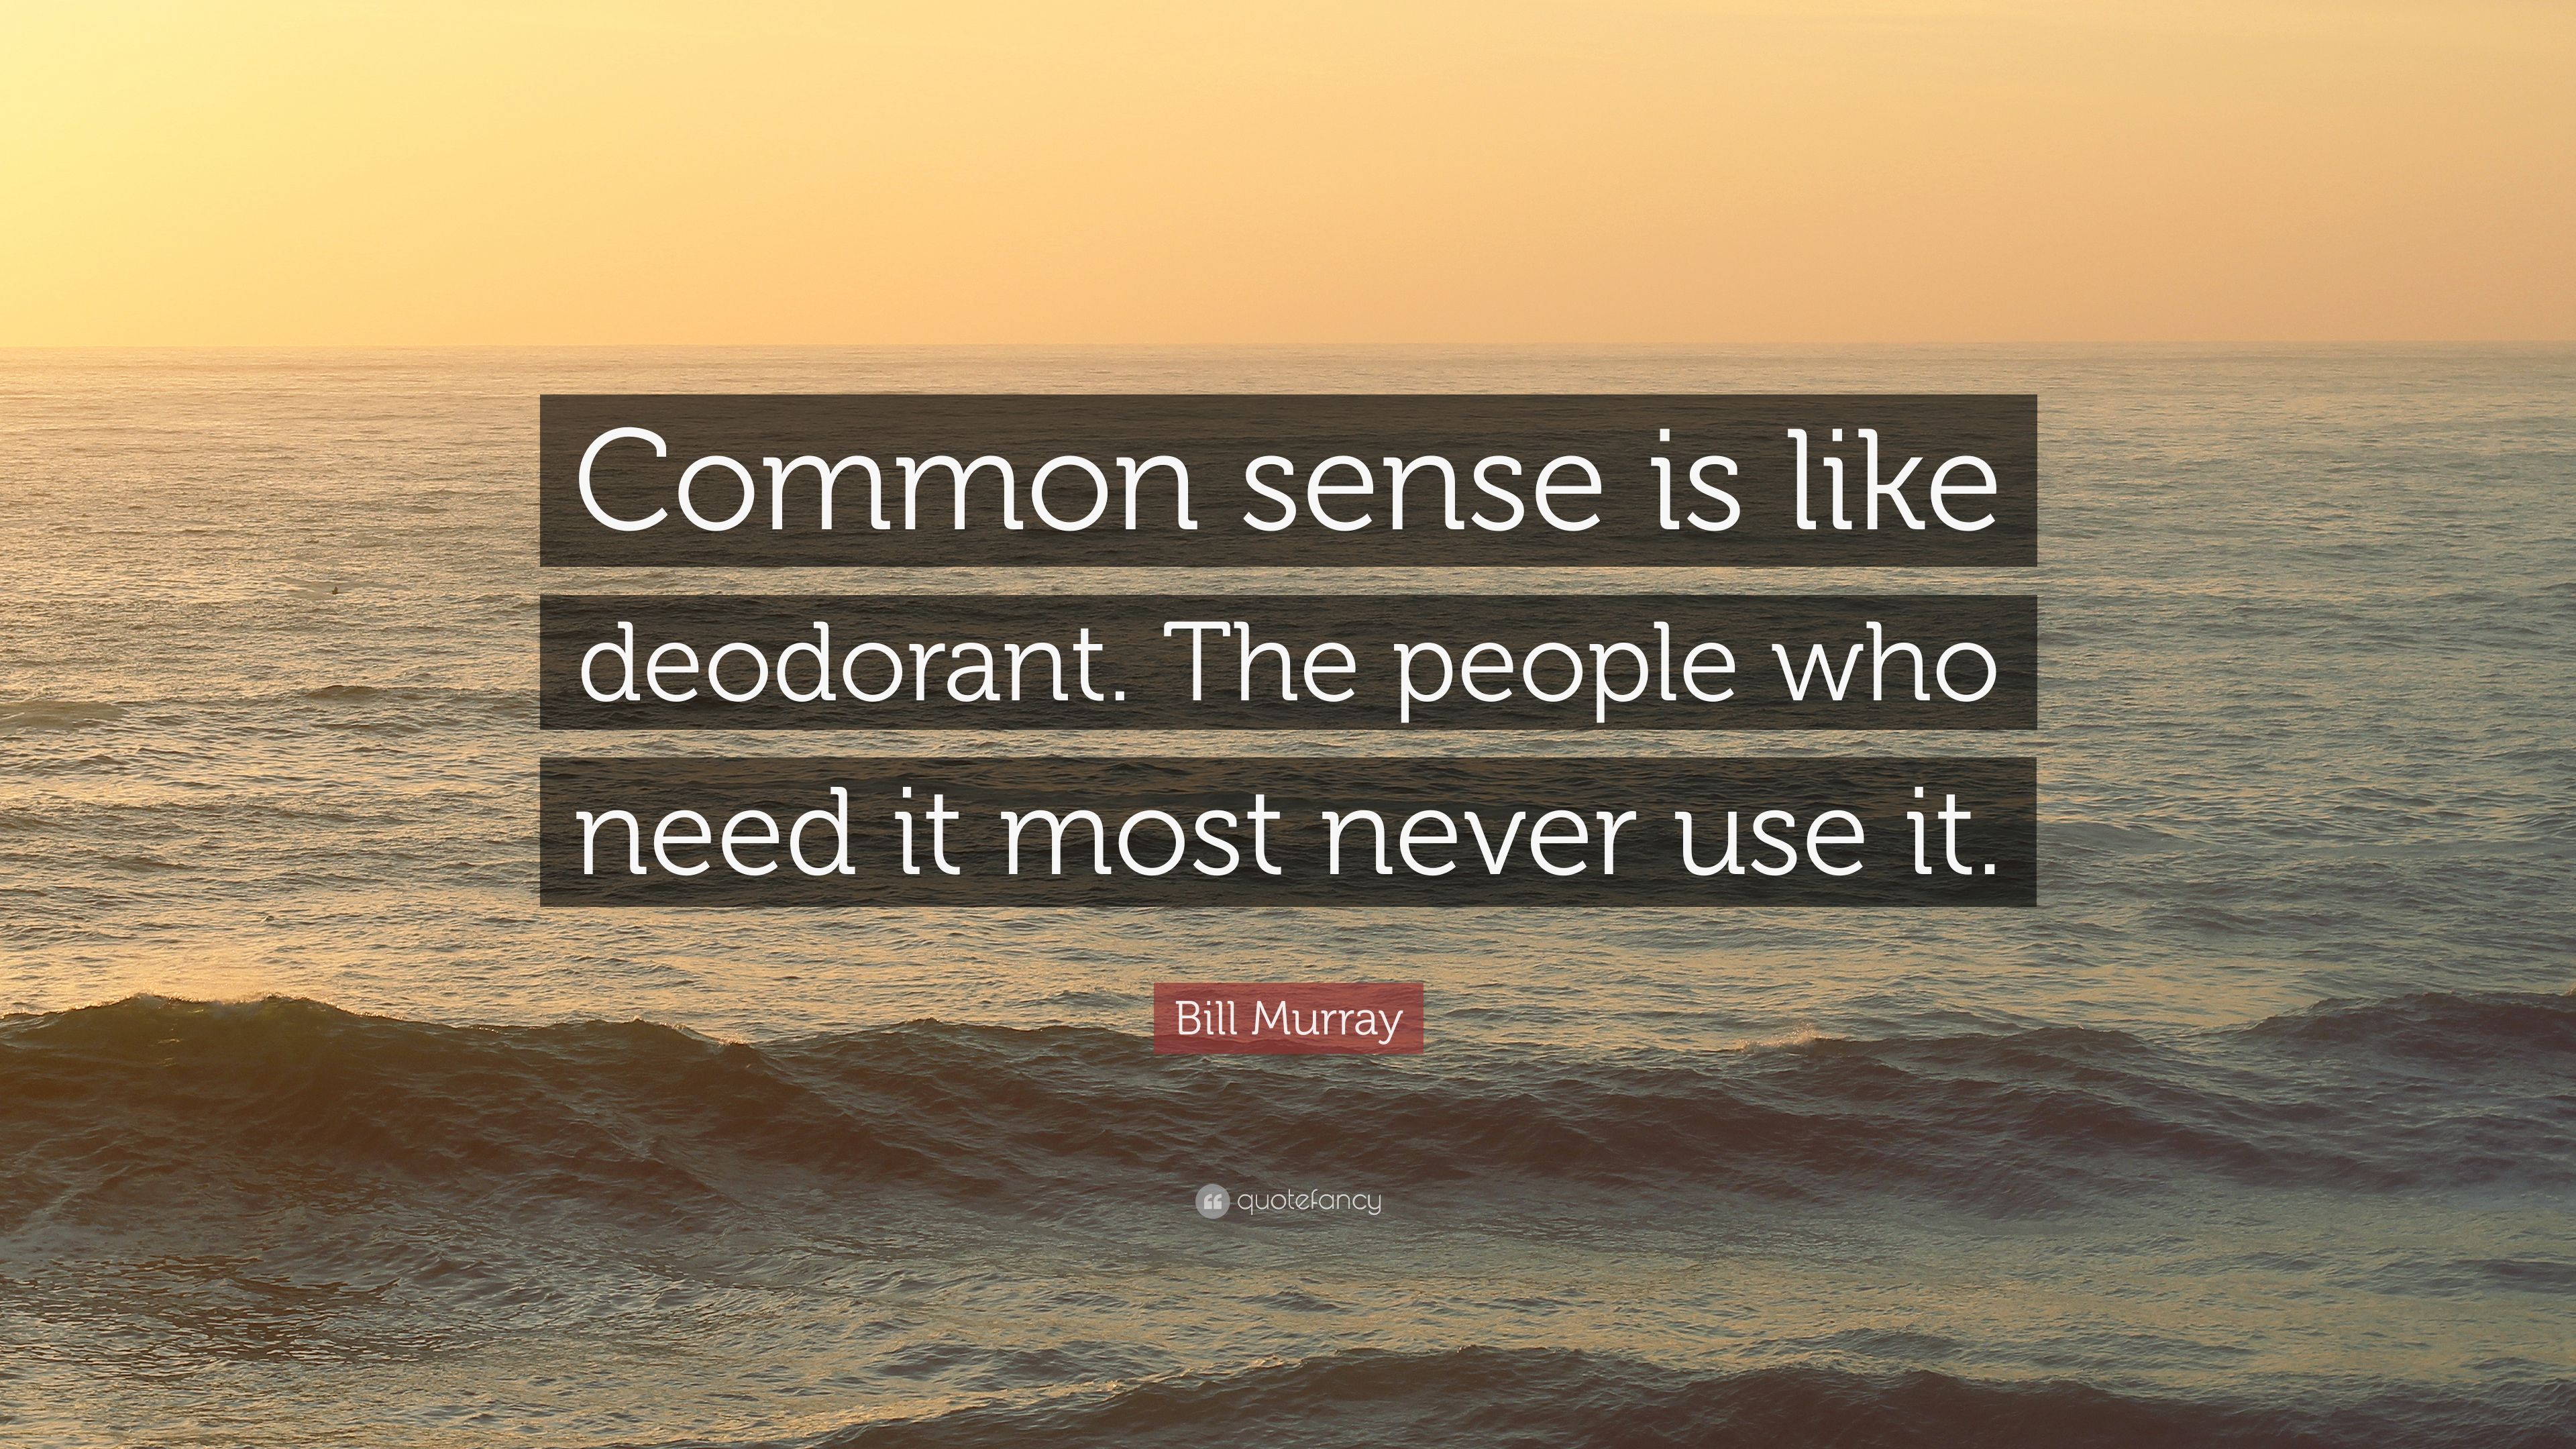 Bill Murray Quote: “Common sense is like deodorant. The people who